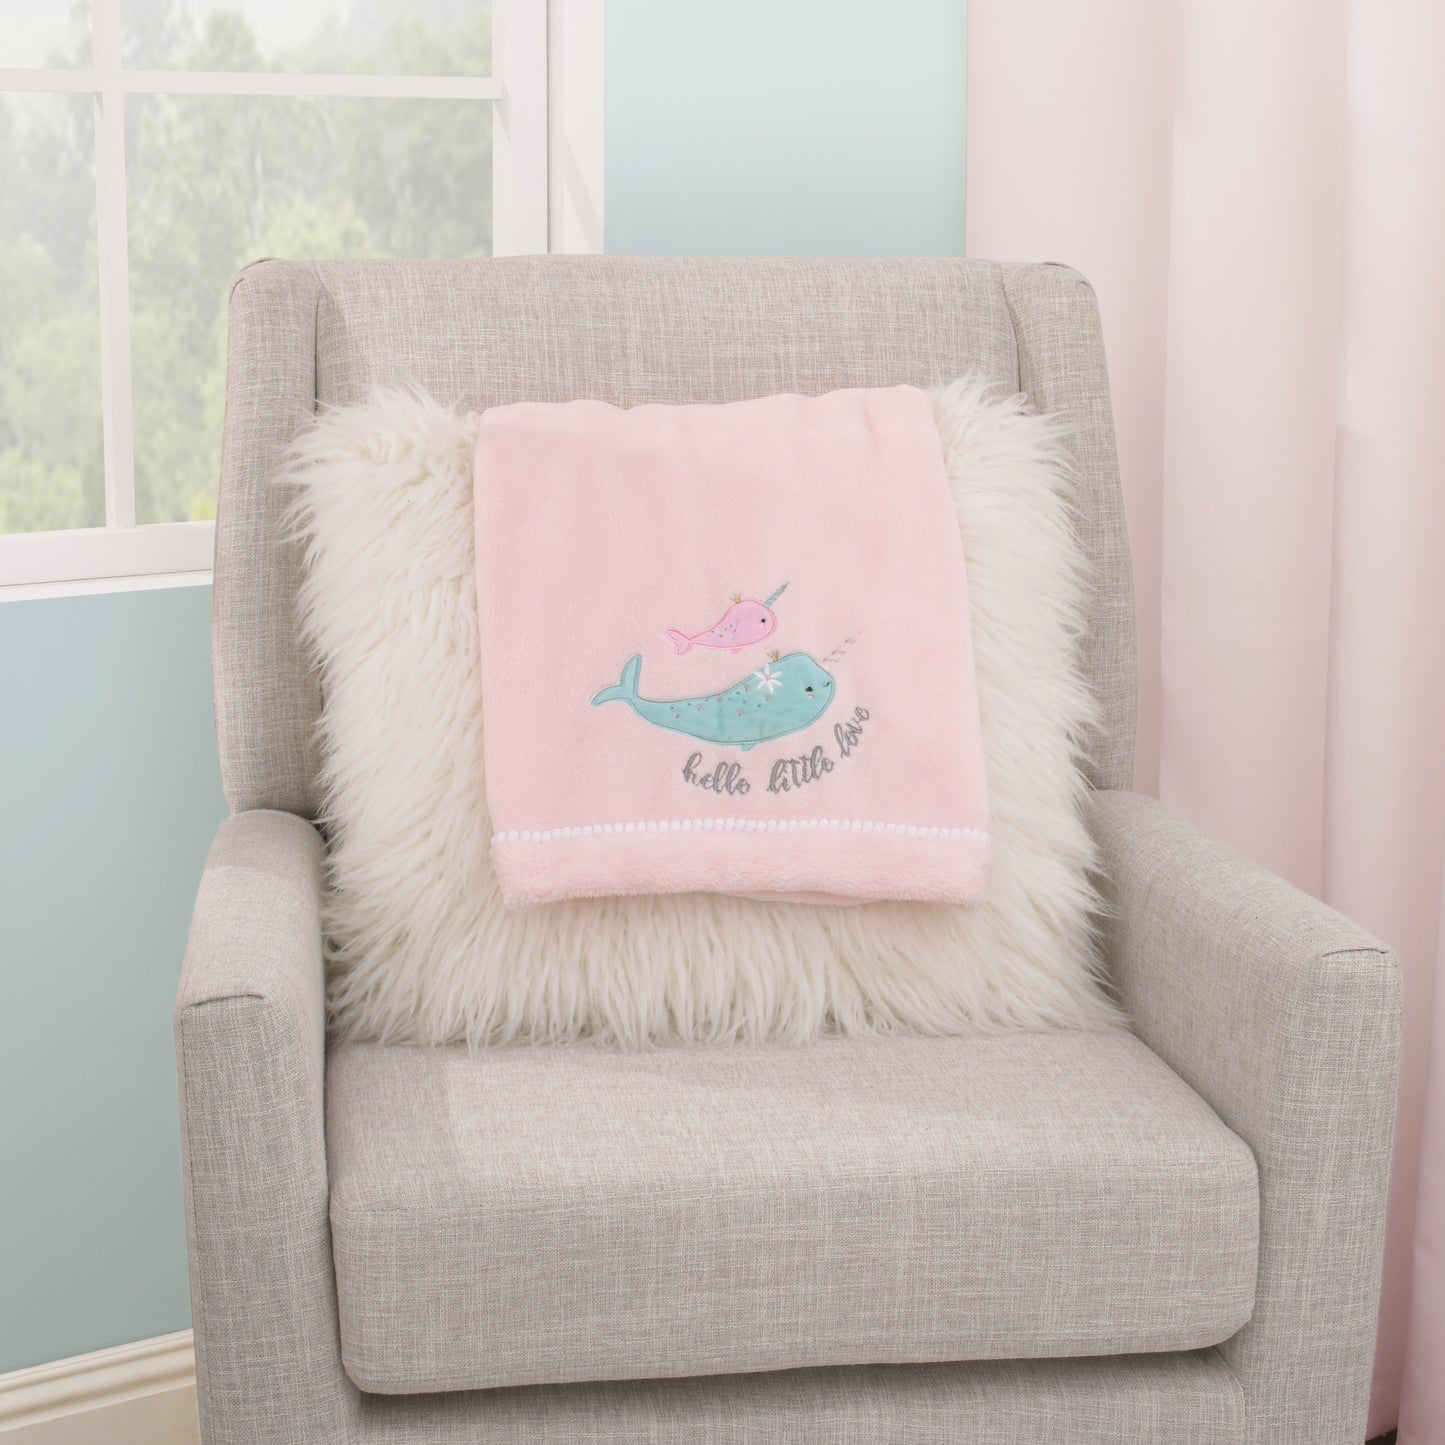 NoJo Under the Sea Whimsy Pink and Blue Narwhals Super Soft Appliqued Baby Blanket